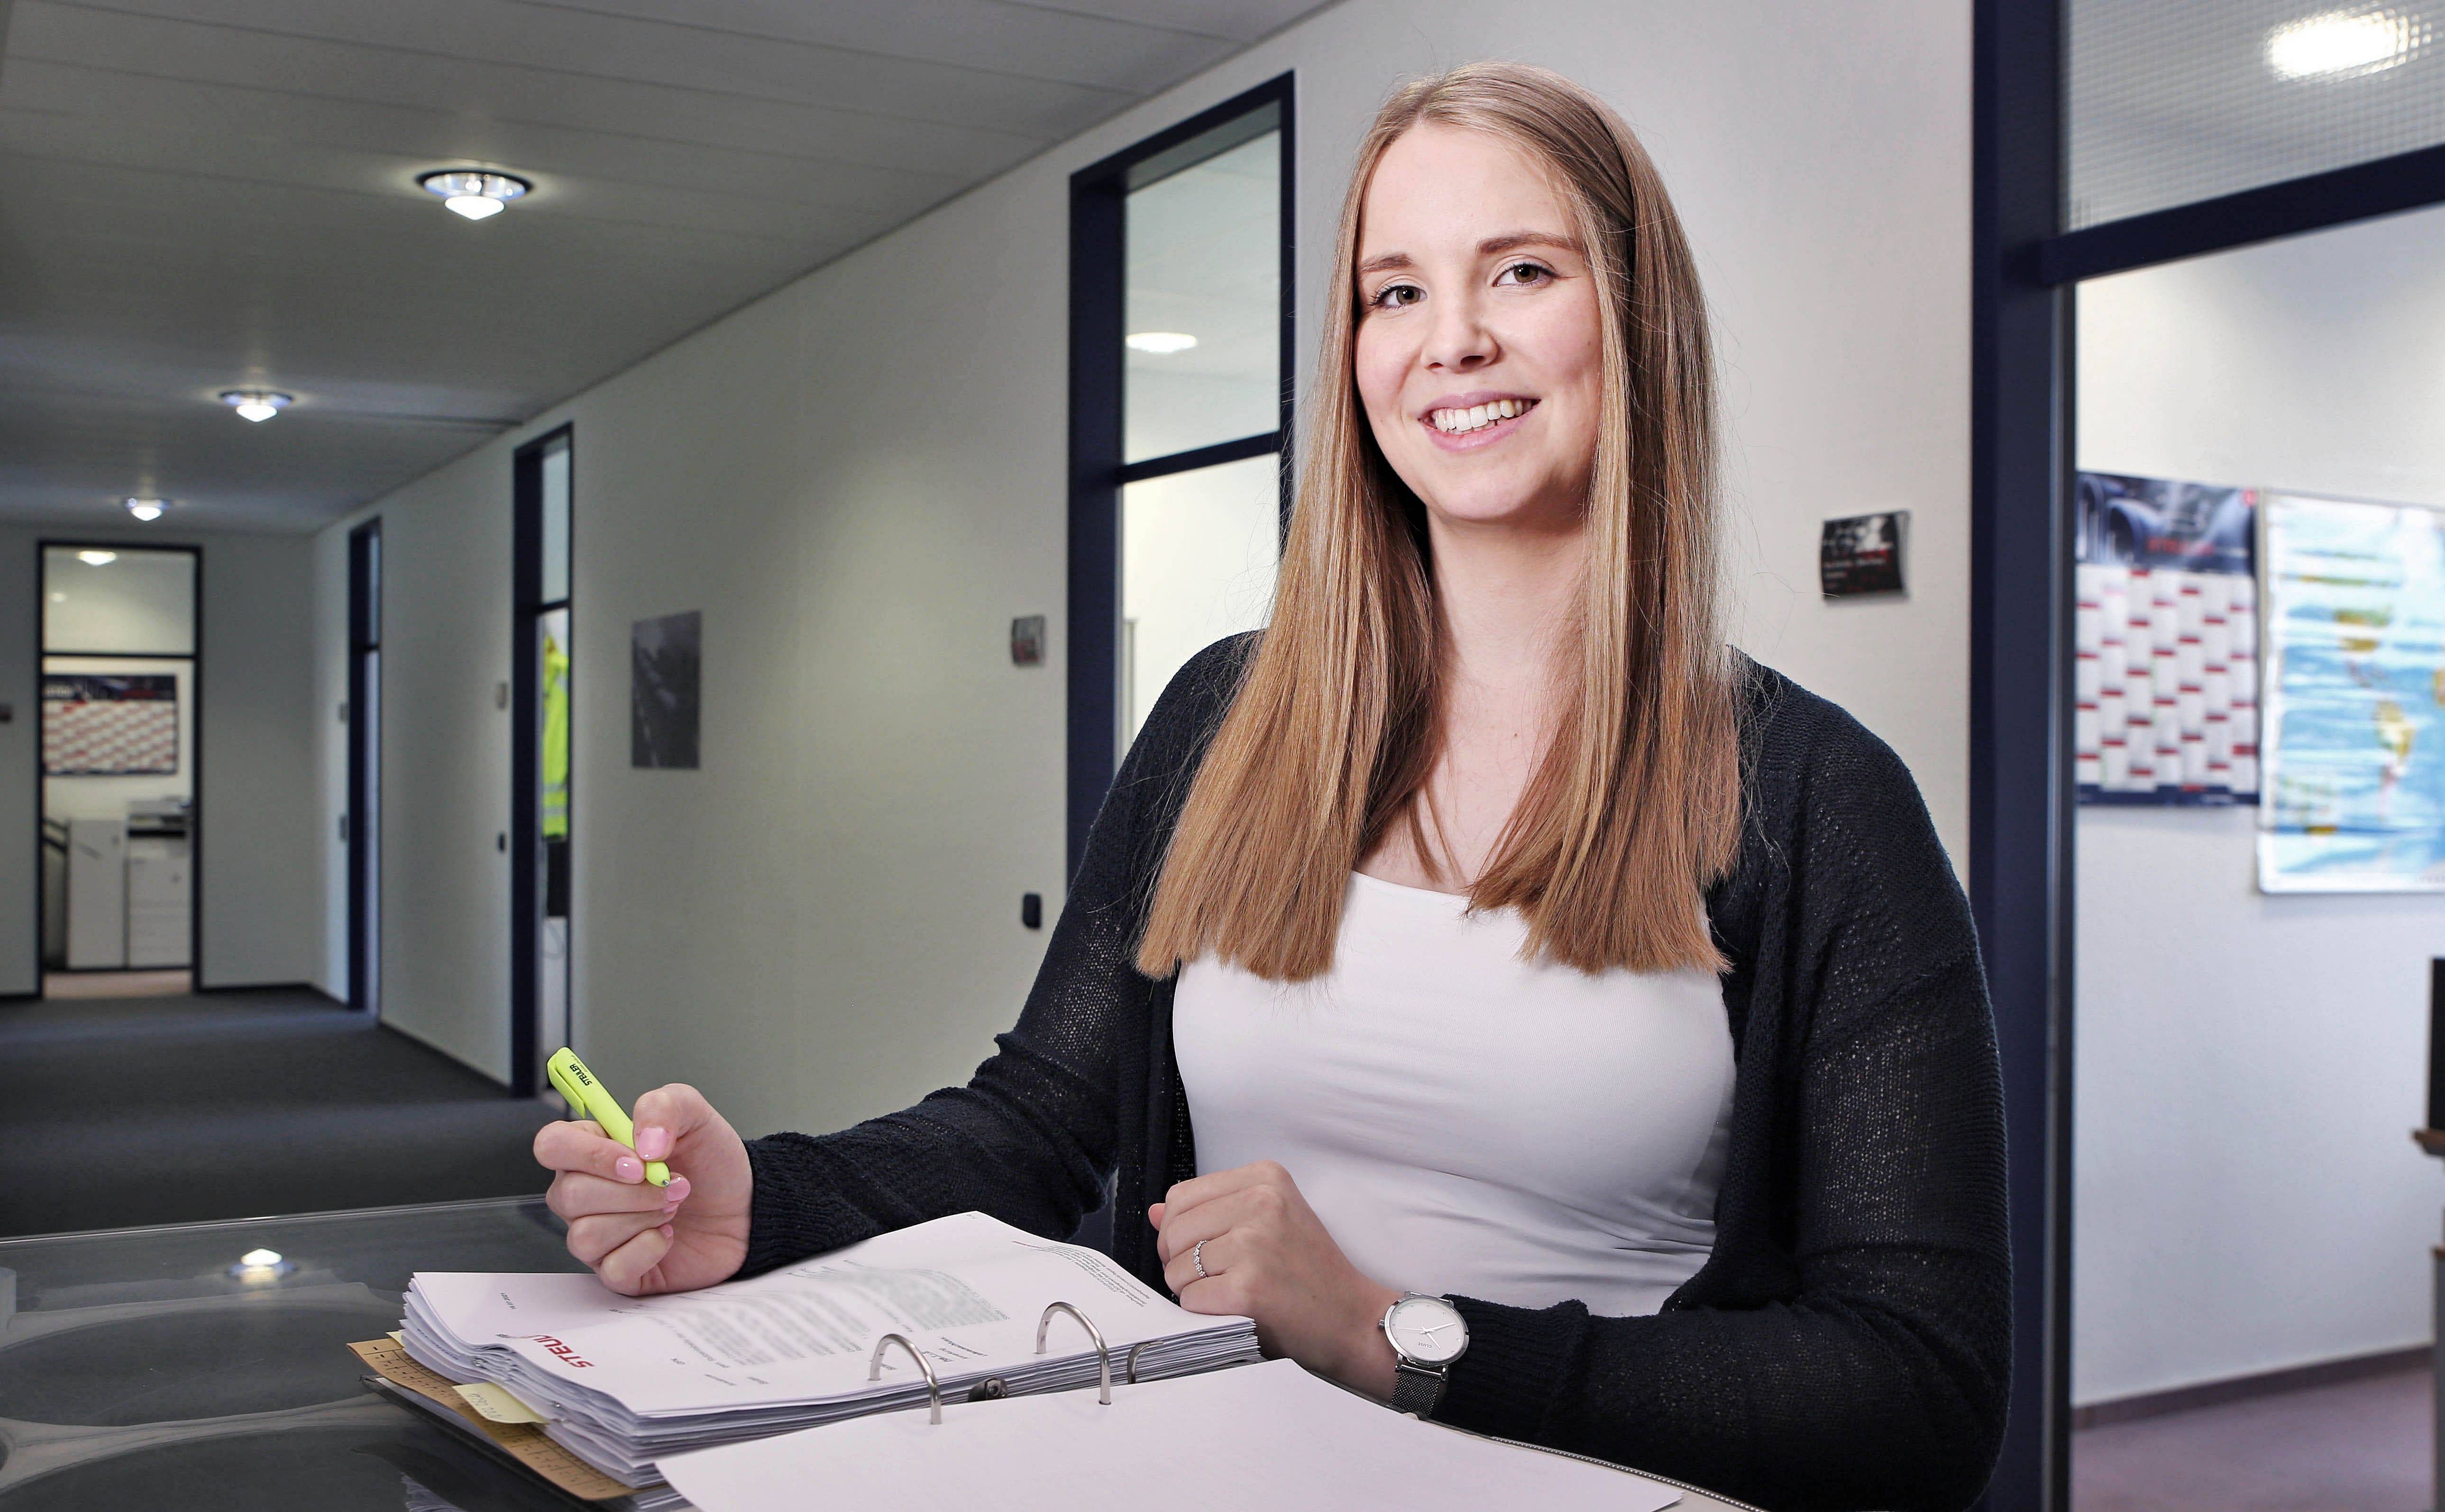 Trainee at Steuler, Carina Bolling